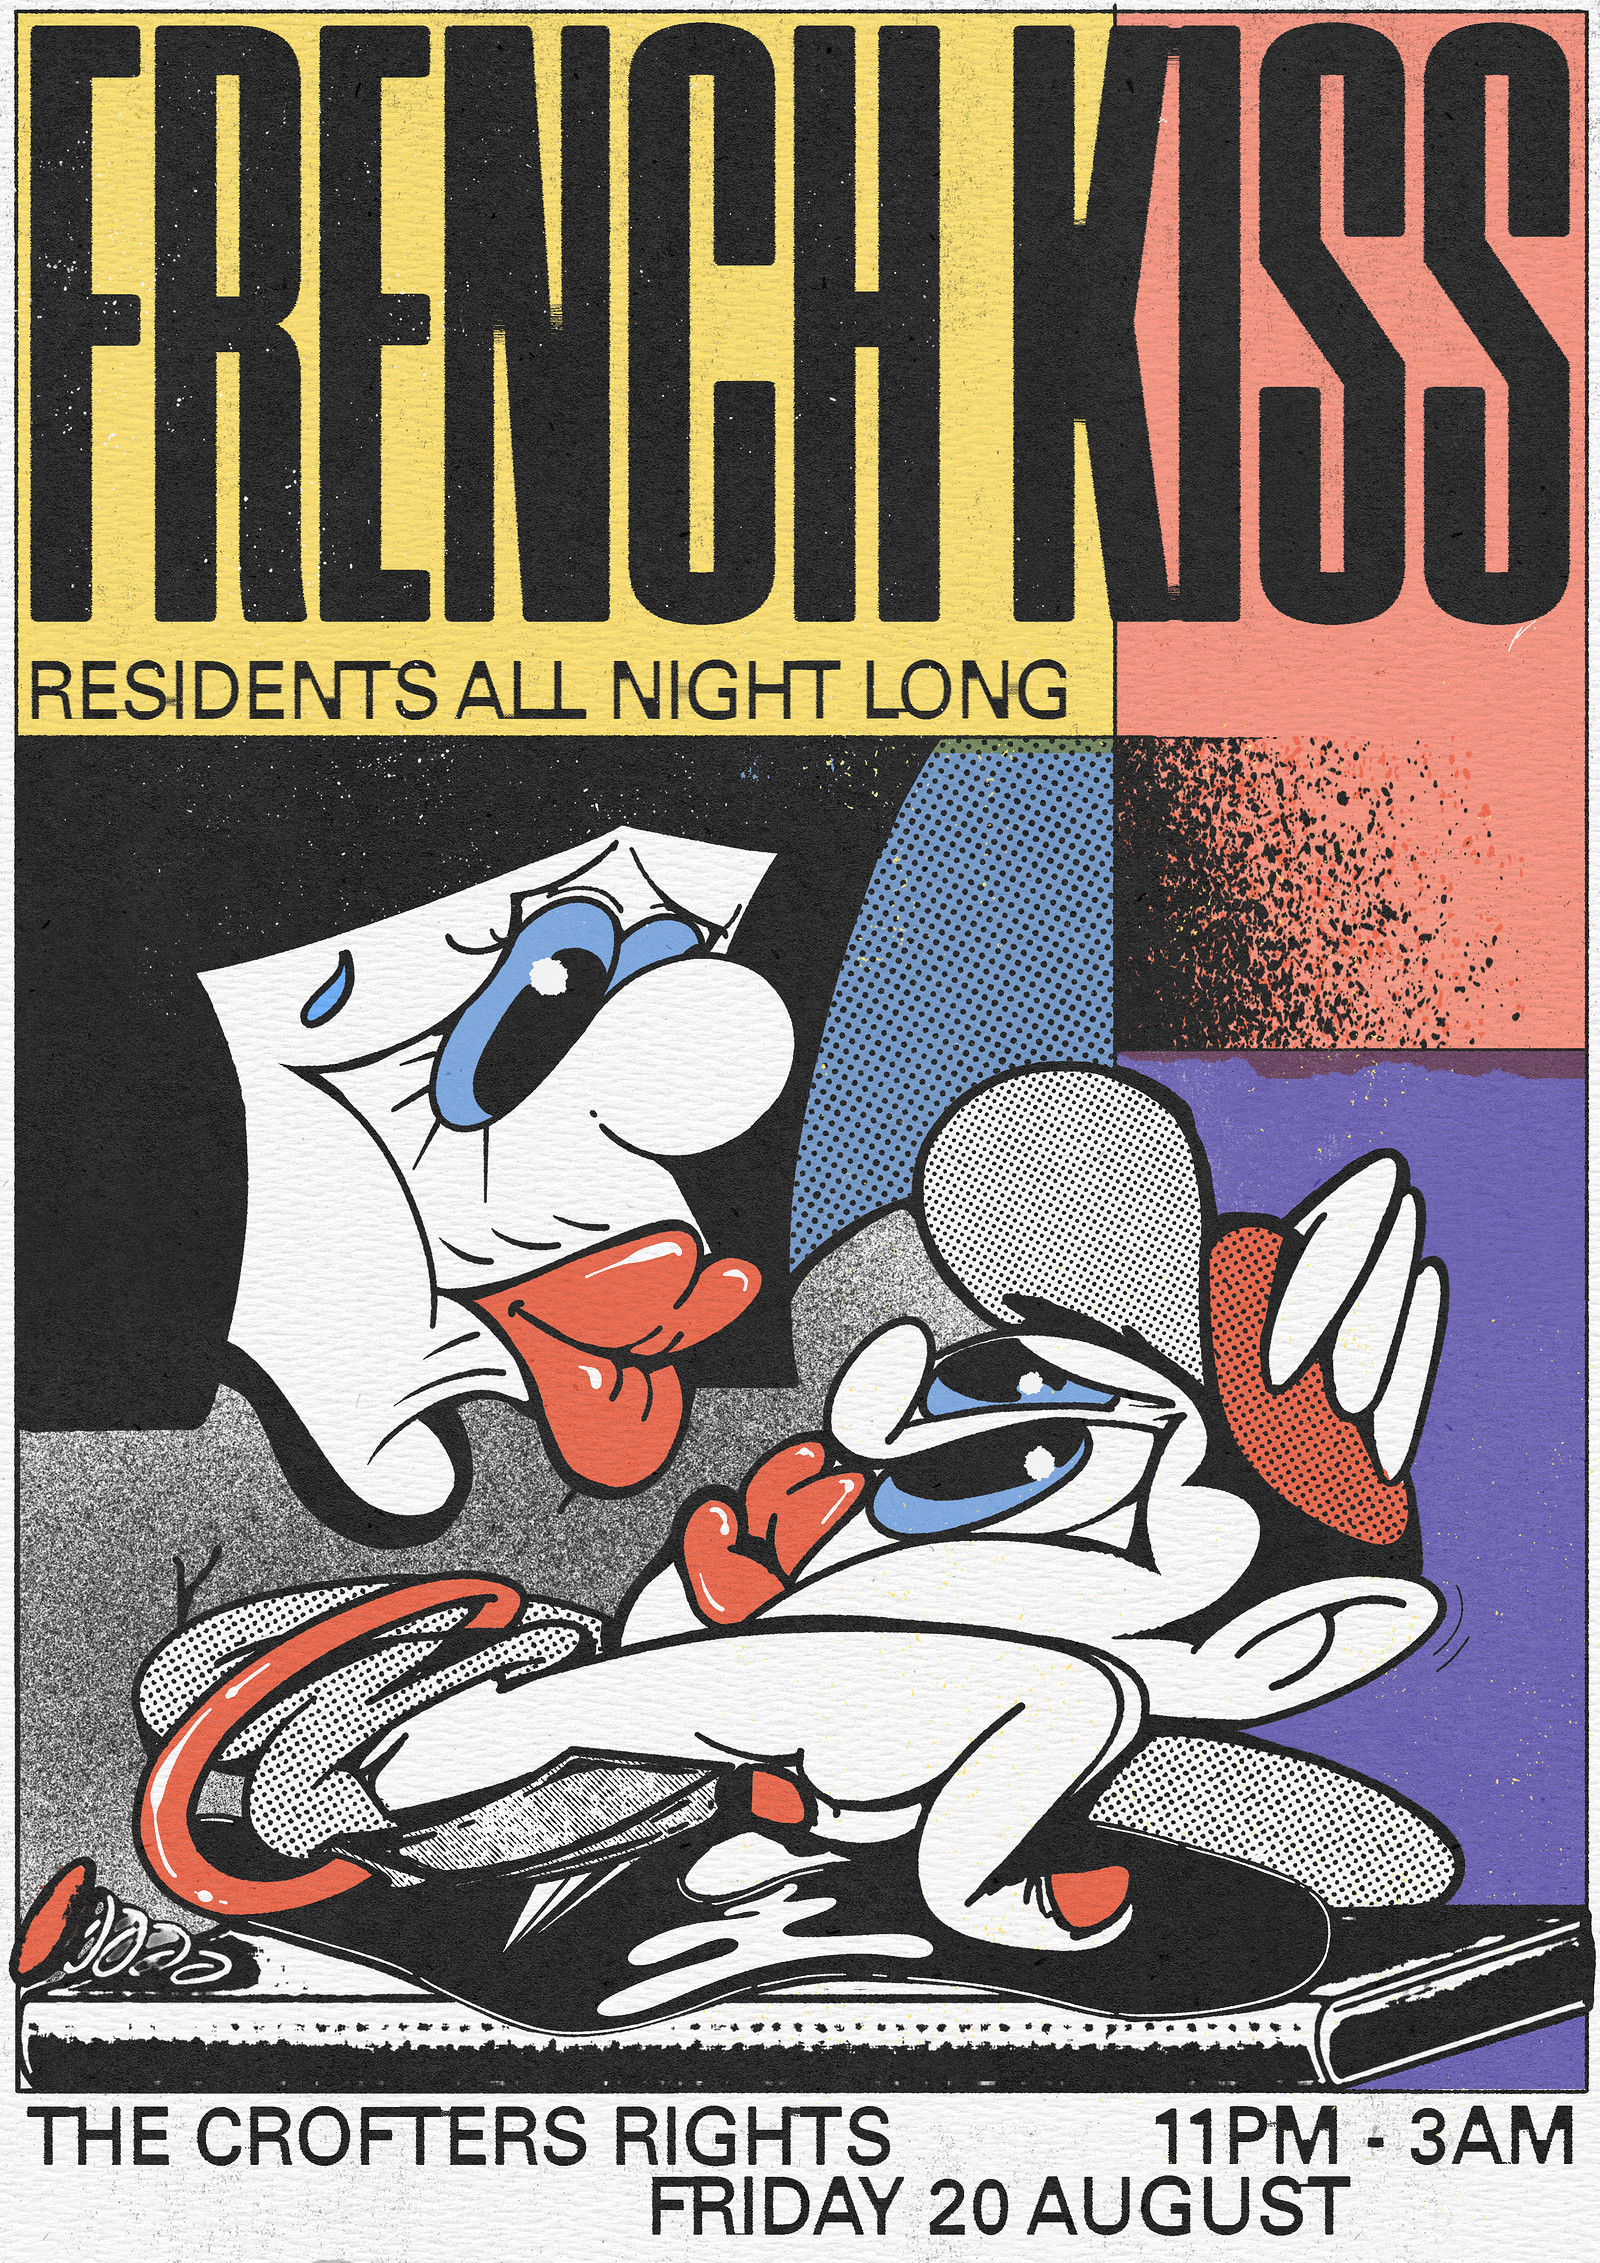 French Kiss: Resident Deejays All Night Long at Crofters Rights